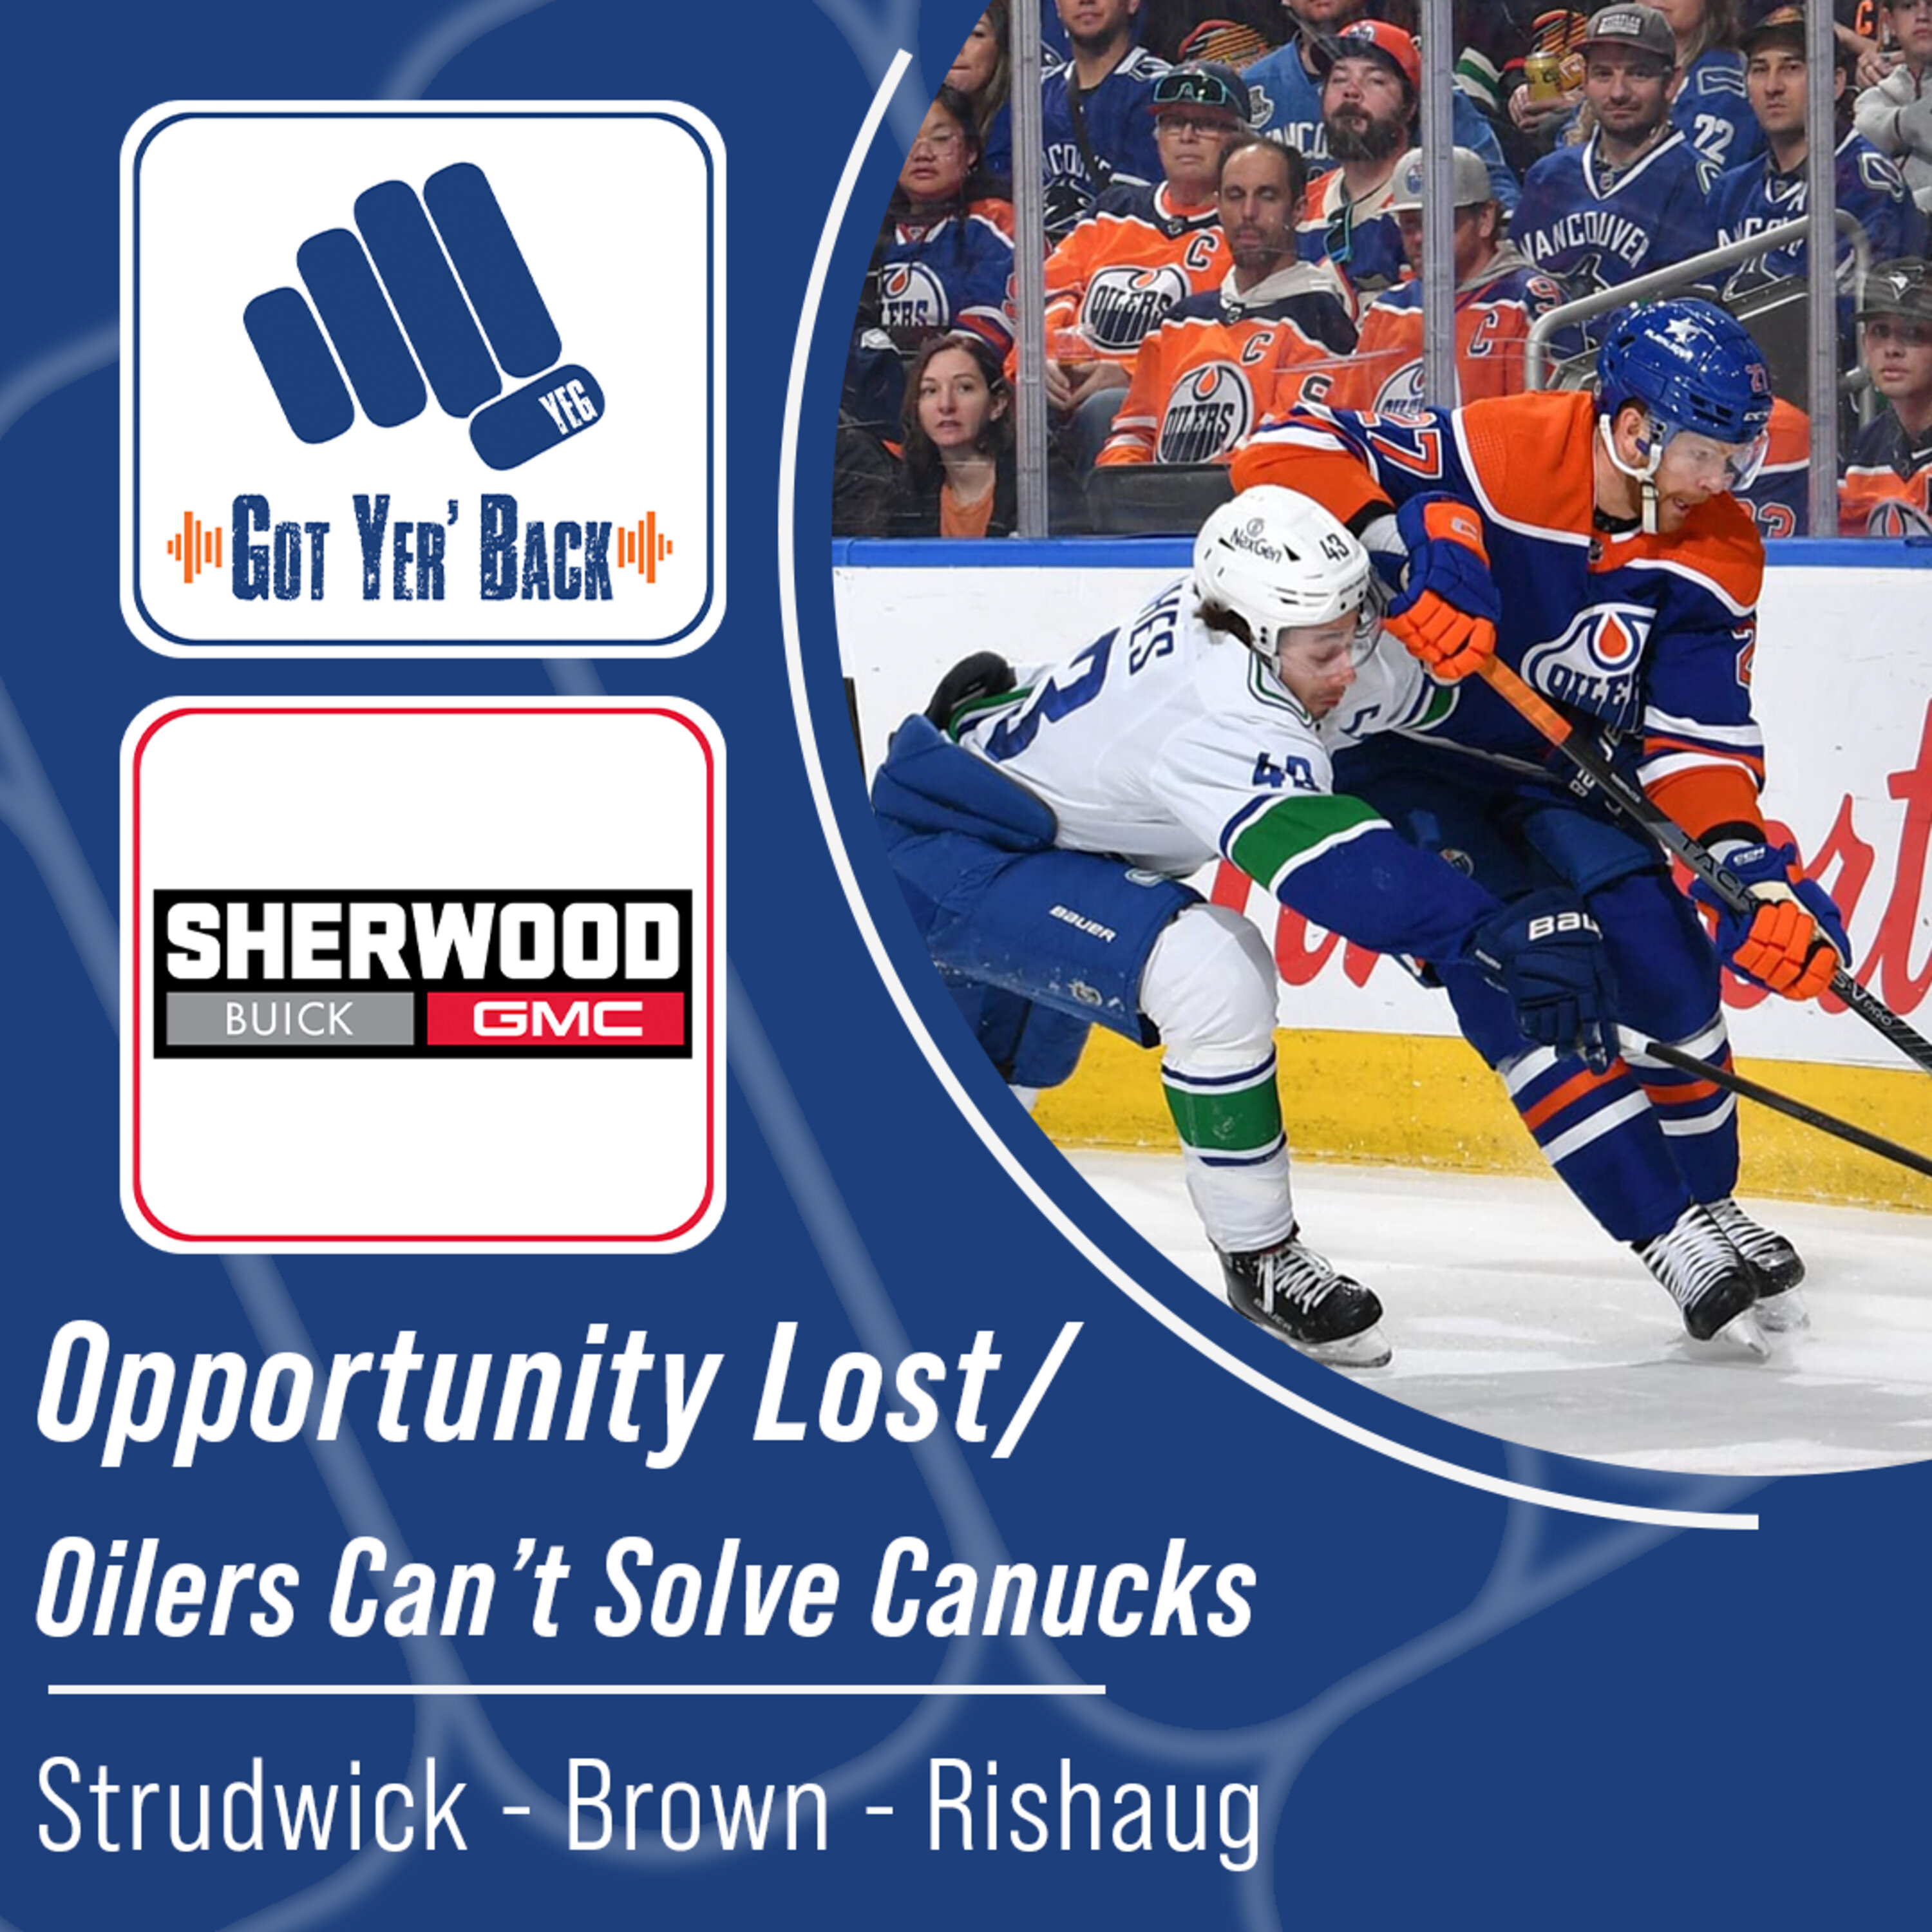 Opportunity Lost / Oilers Can’t Solve Canucks